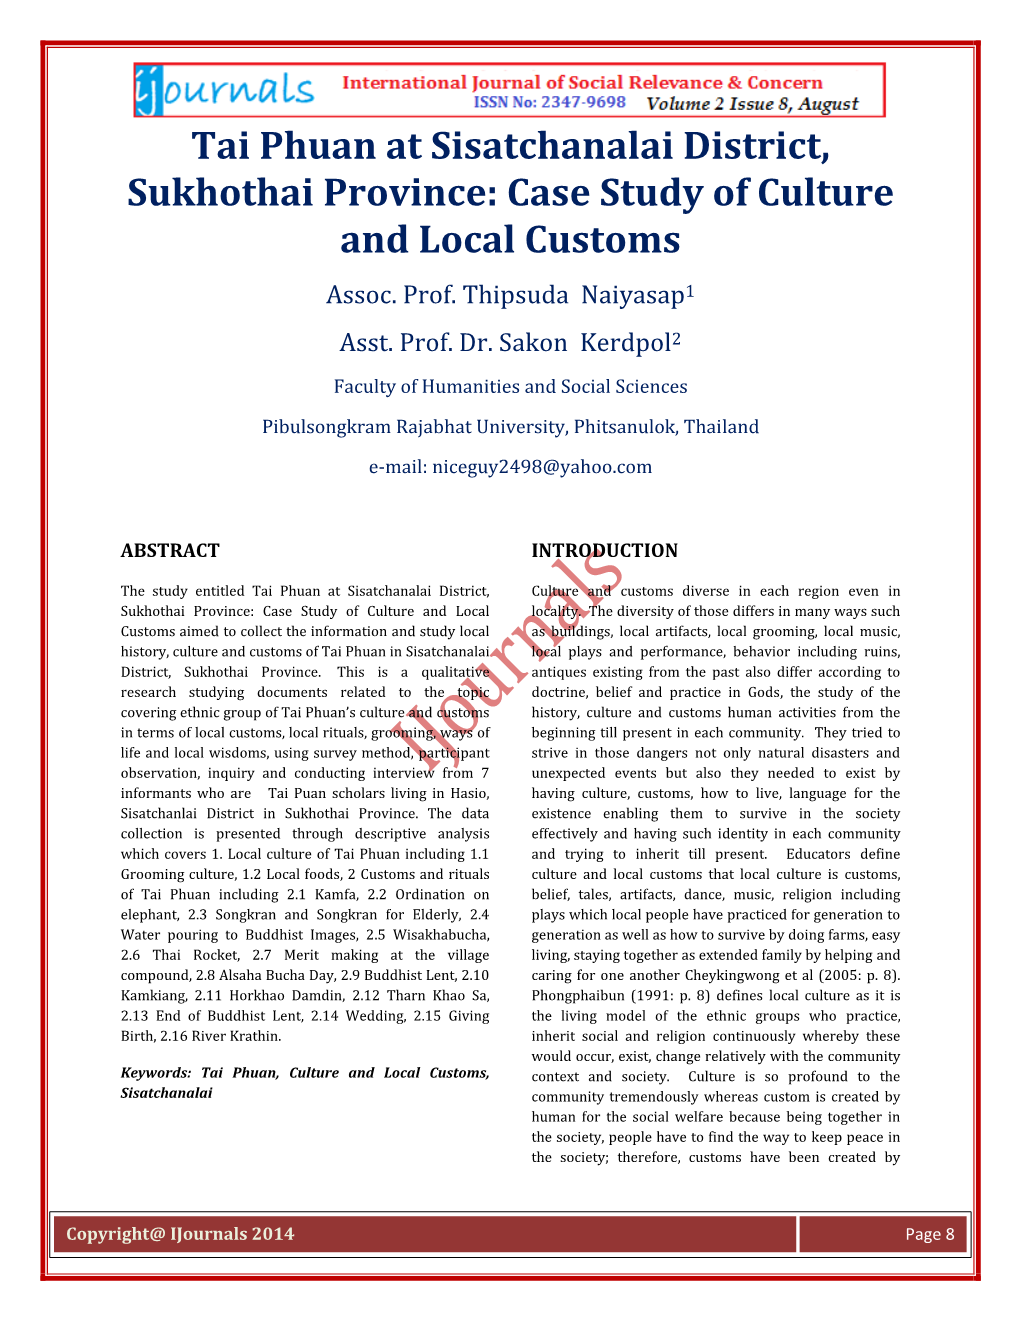 Tai Phuan at Sisatchanalai District, Sukhothai Province: Case Study of Culture and Local Customs Assoc